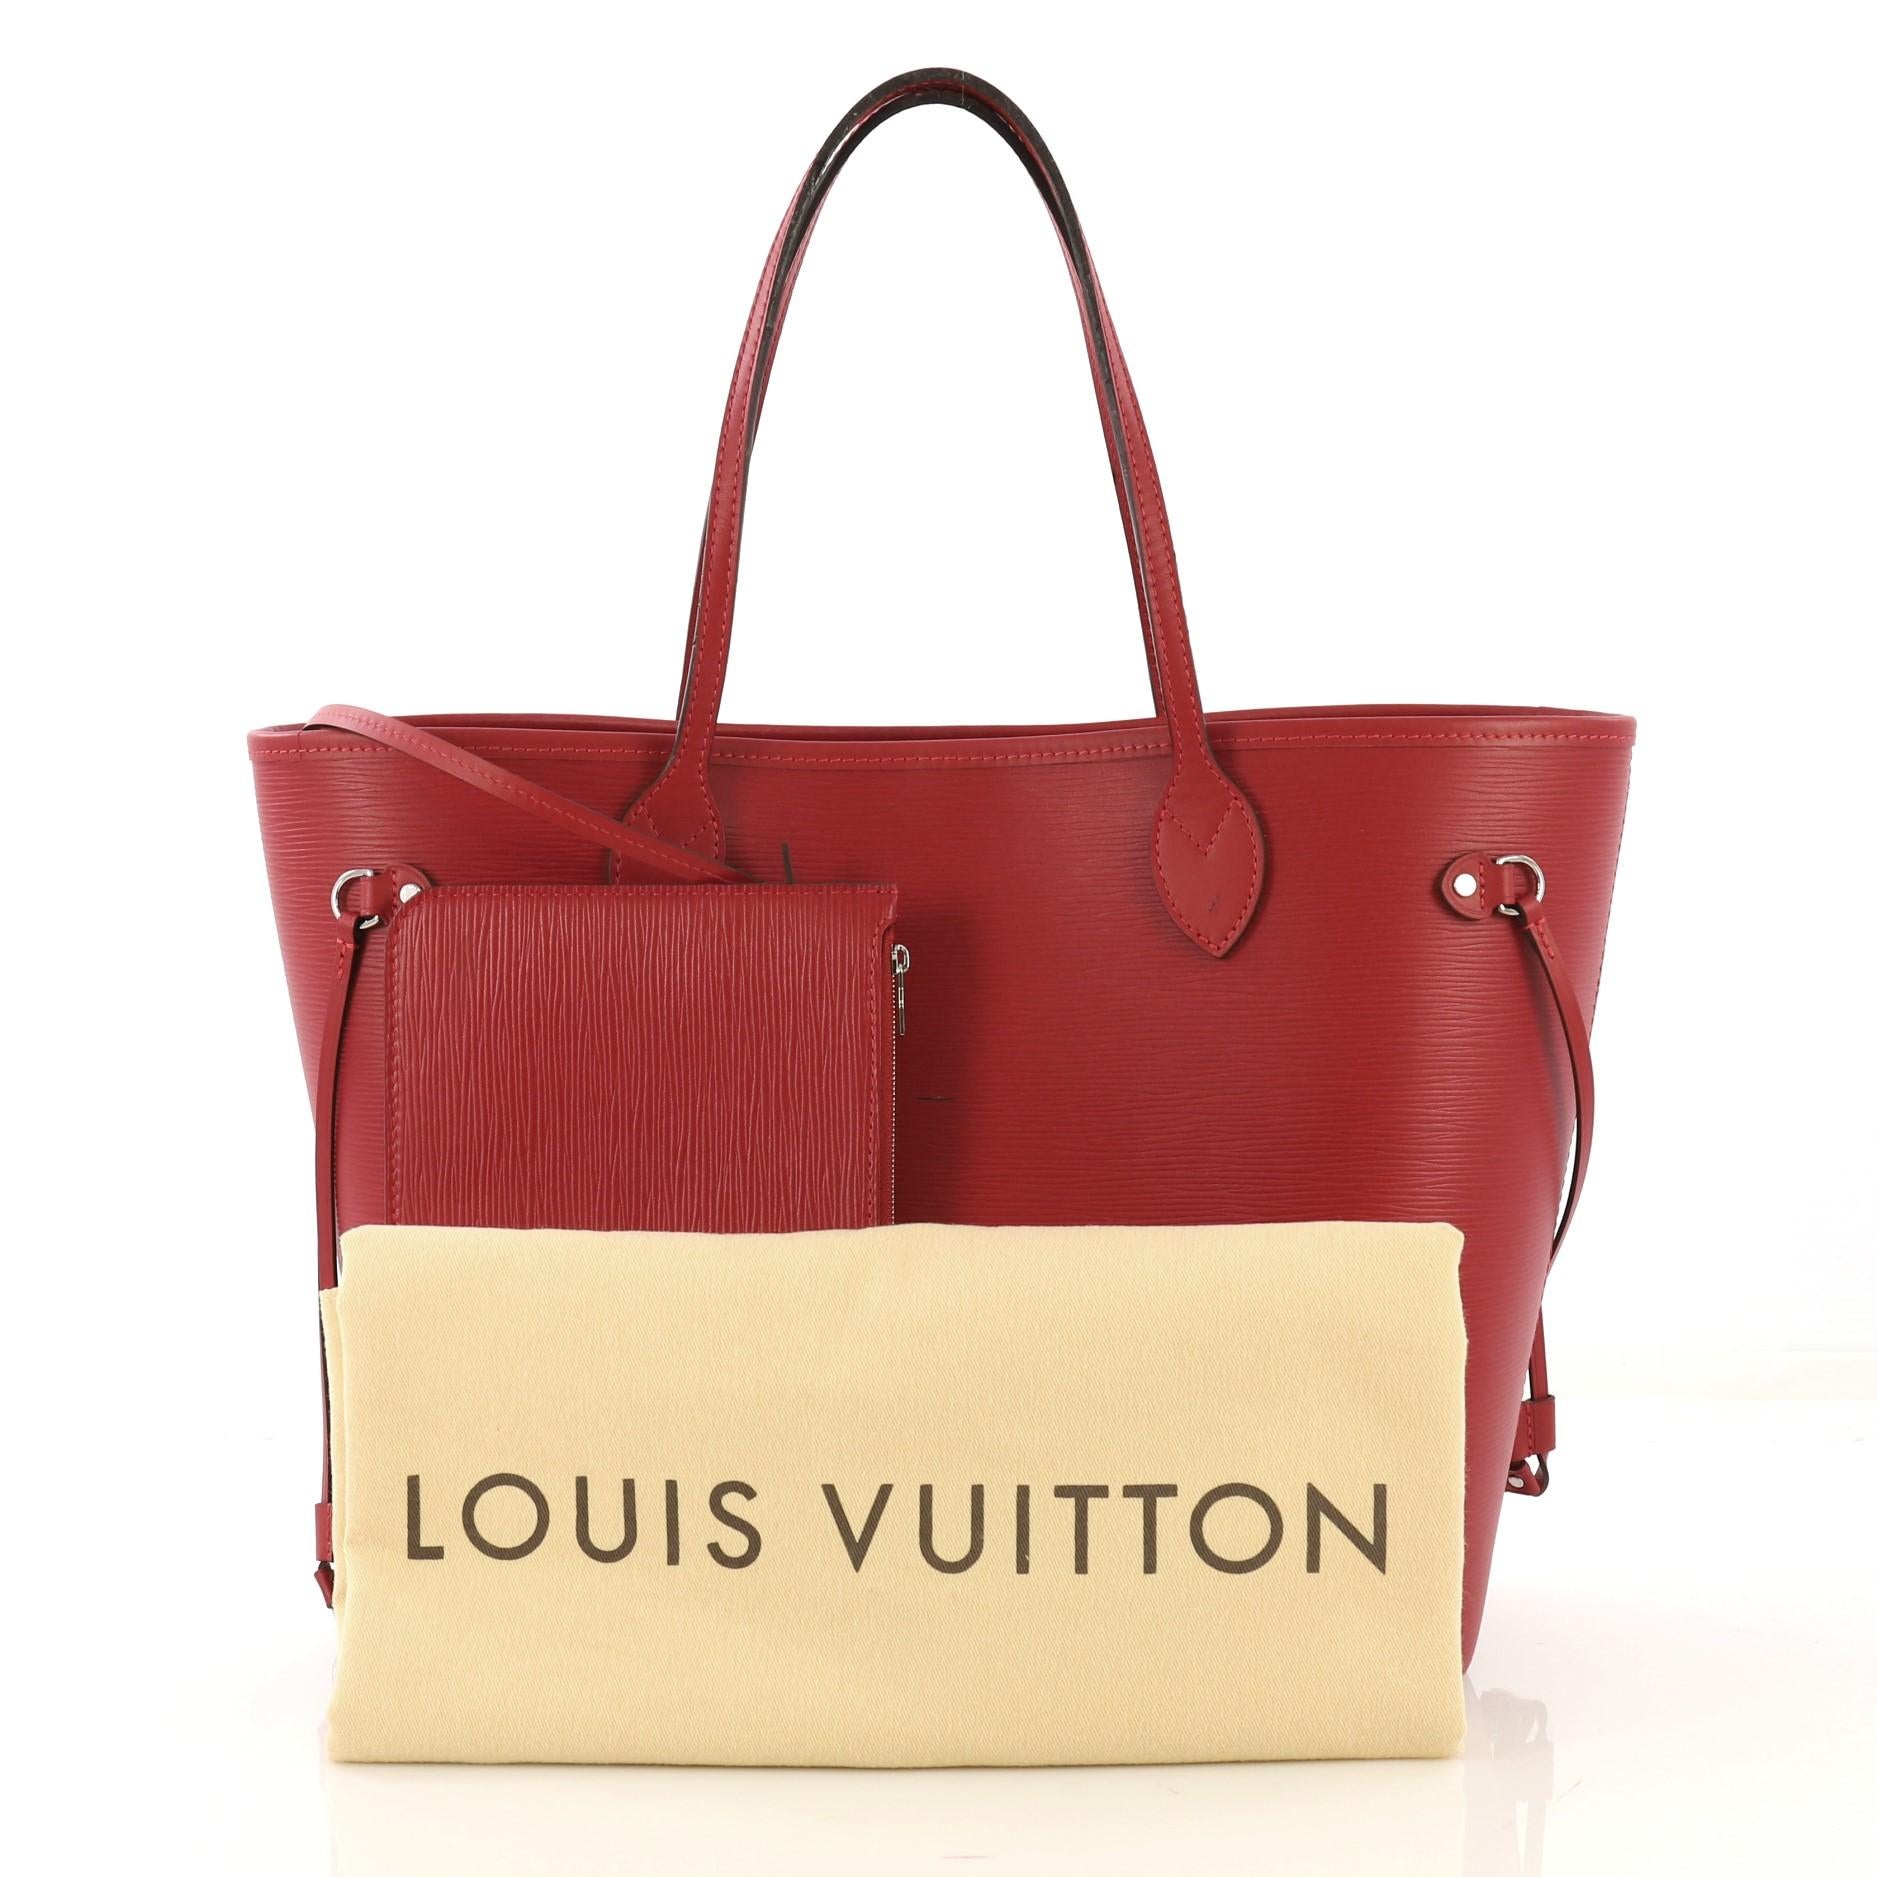 This Louis Vuitton Neverfull Tote Epi Leather MM, crafted in red epi leather, features dual flat leather handles, side laces, and silver-tone hardware. Its wide open top and center hook closure opens to a red microfiber interior. Authenticity code